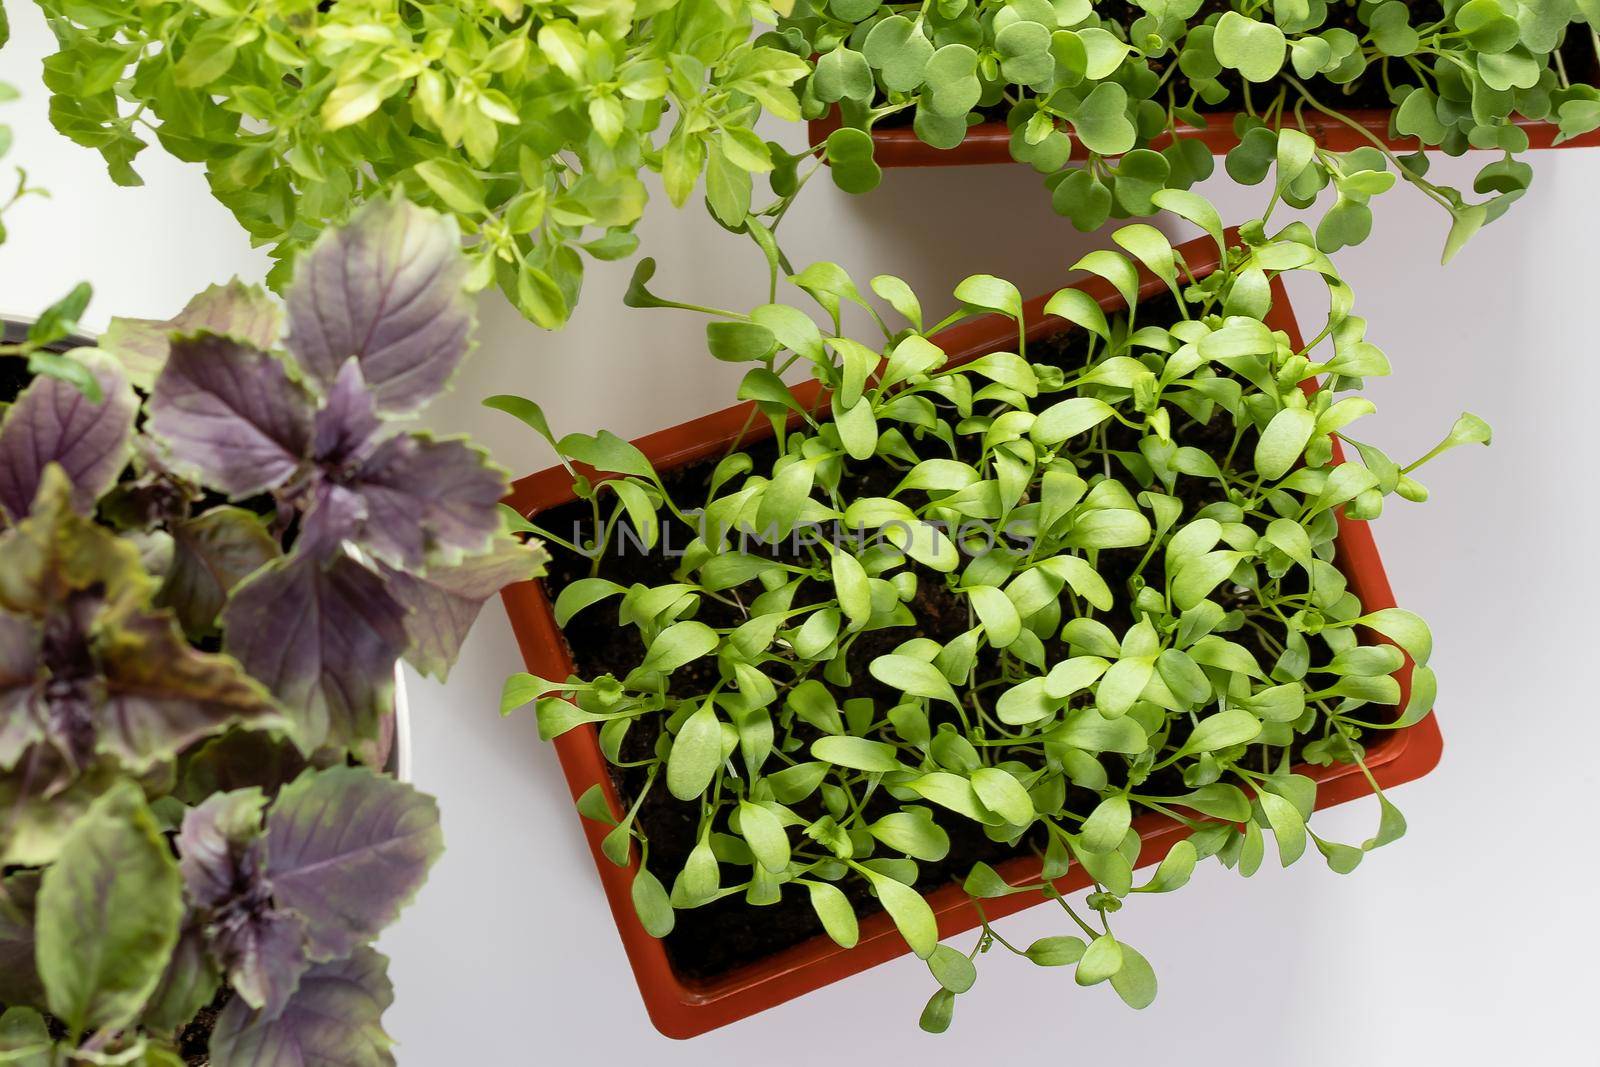 Watercress and other edible greens grow in pots on the windowsill. Growing healthy vitamin greens at home. by galsand